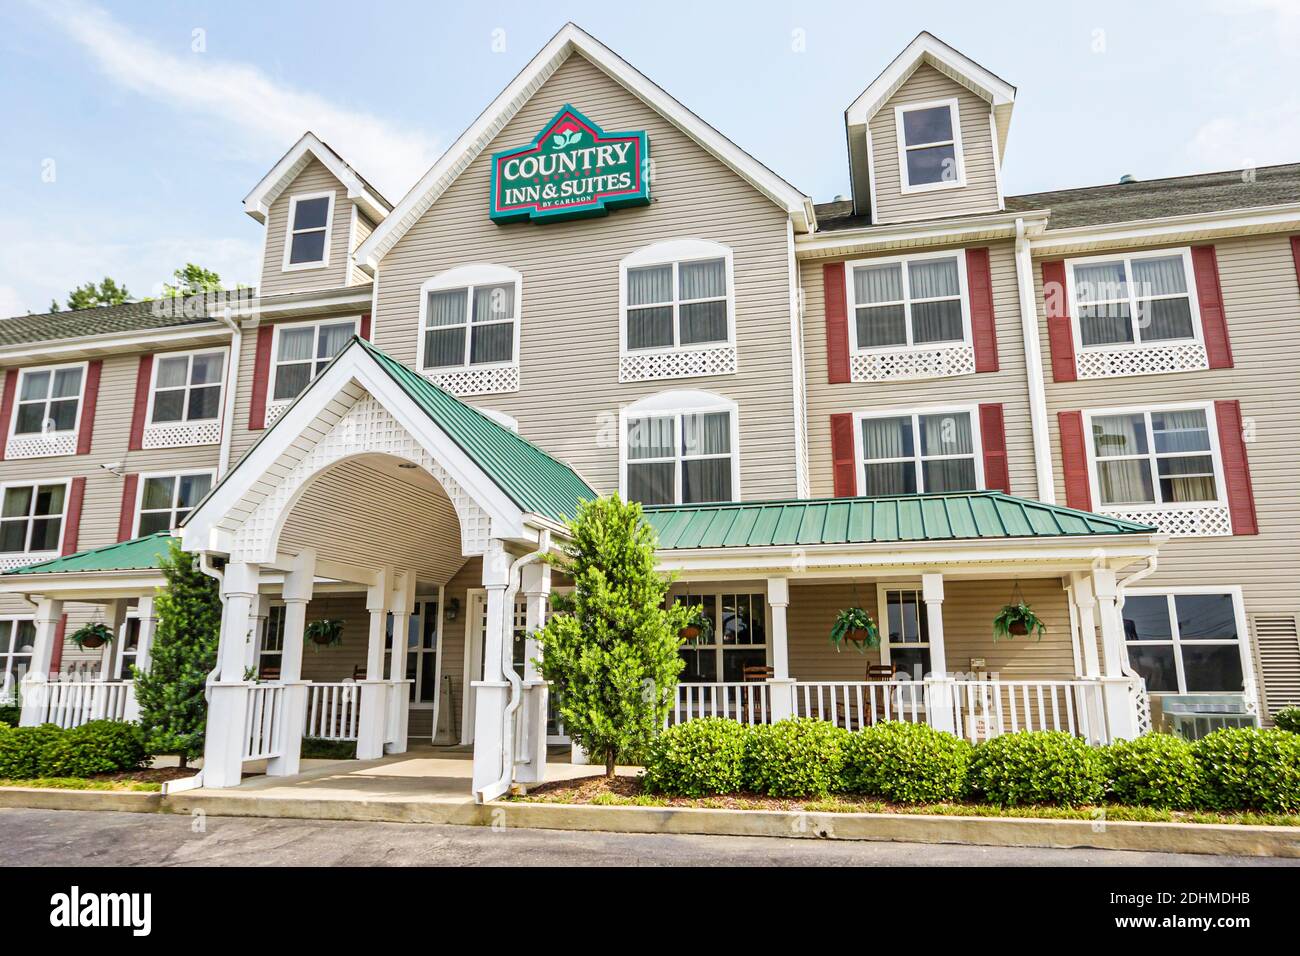 Tuscaloosa Alabama,Country Inn & Suites hotel,outside exterior front entrance, Stock Photo